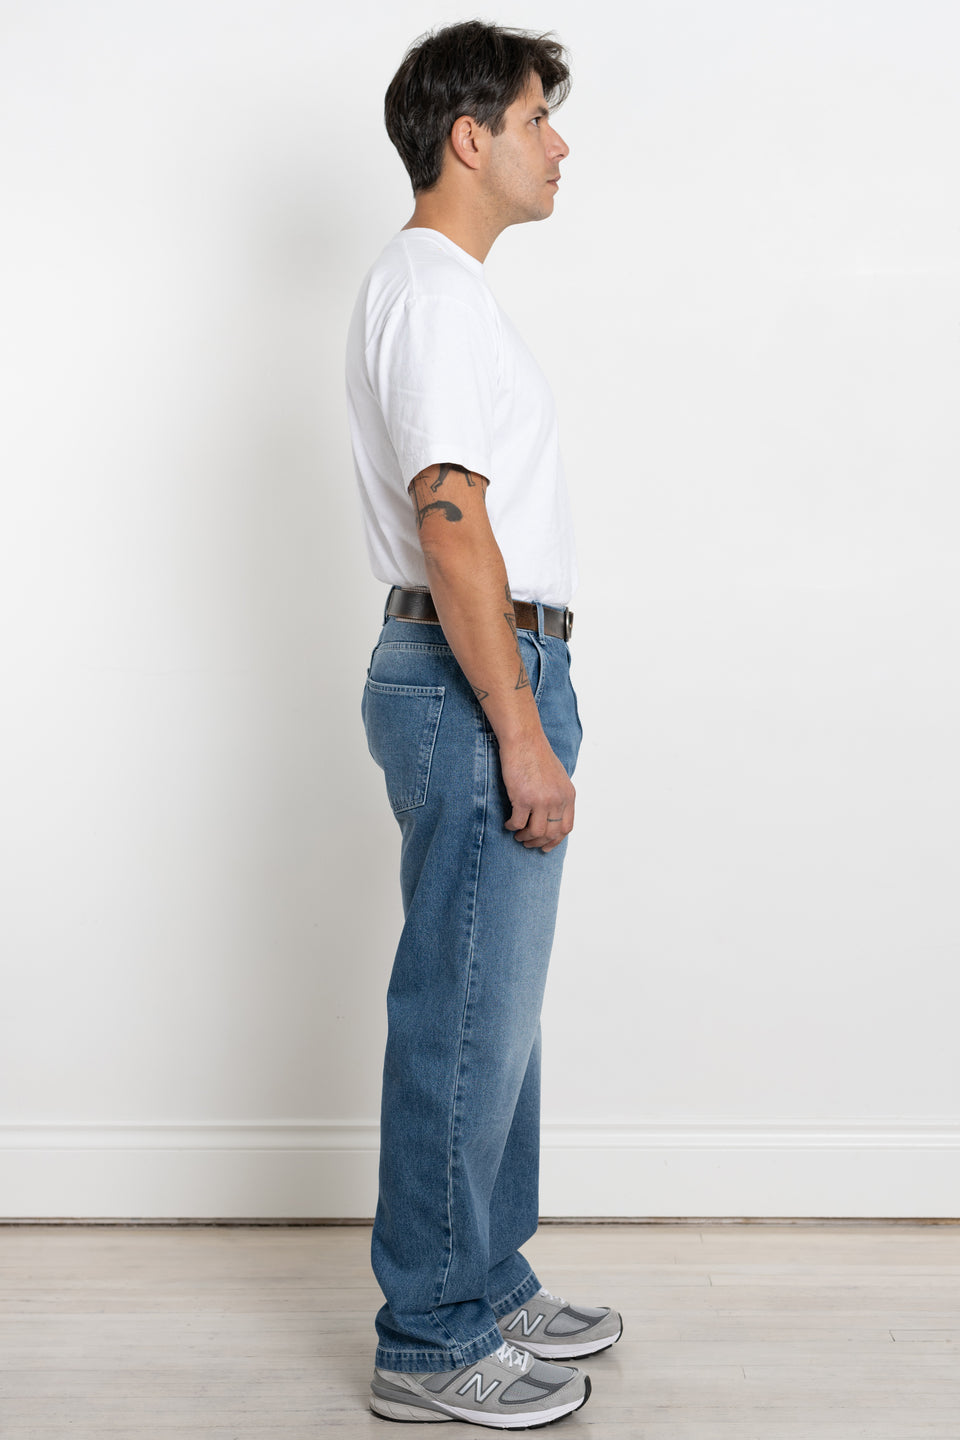 mfpen AW23 or FW23 Men's Collection Regular Jeans Washed Blue Organic Cotton Calculus Victoria BC Canada